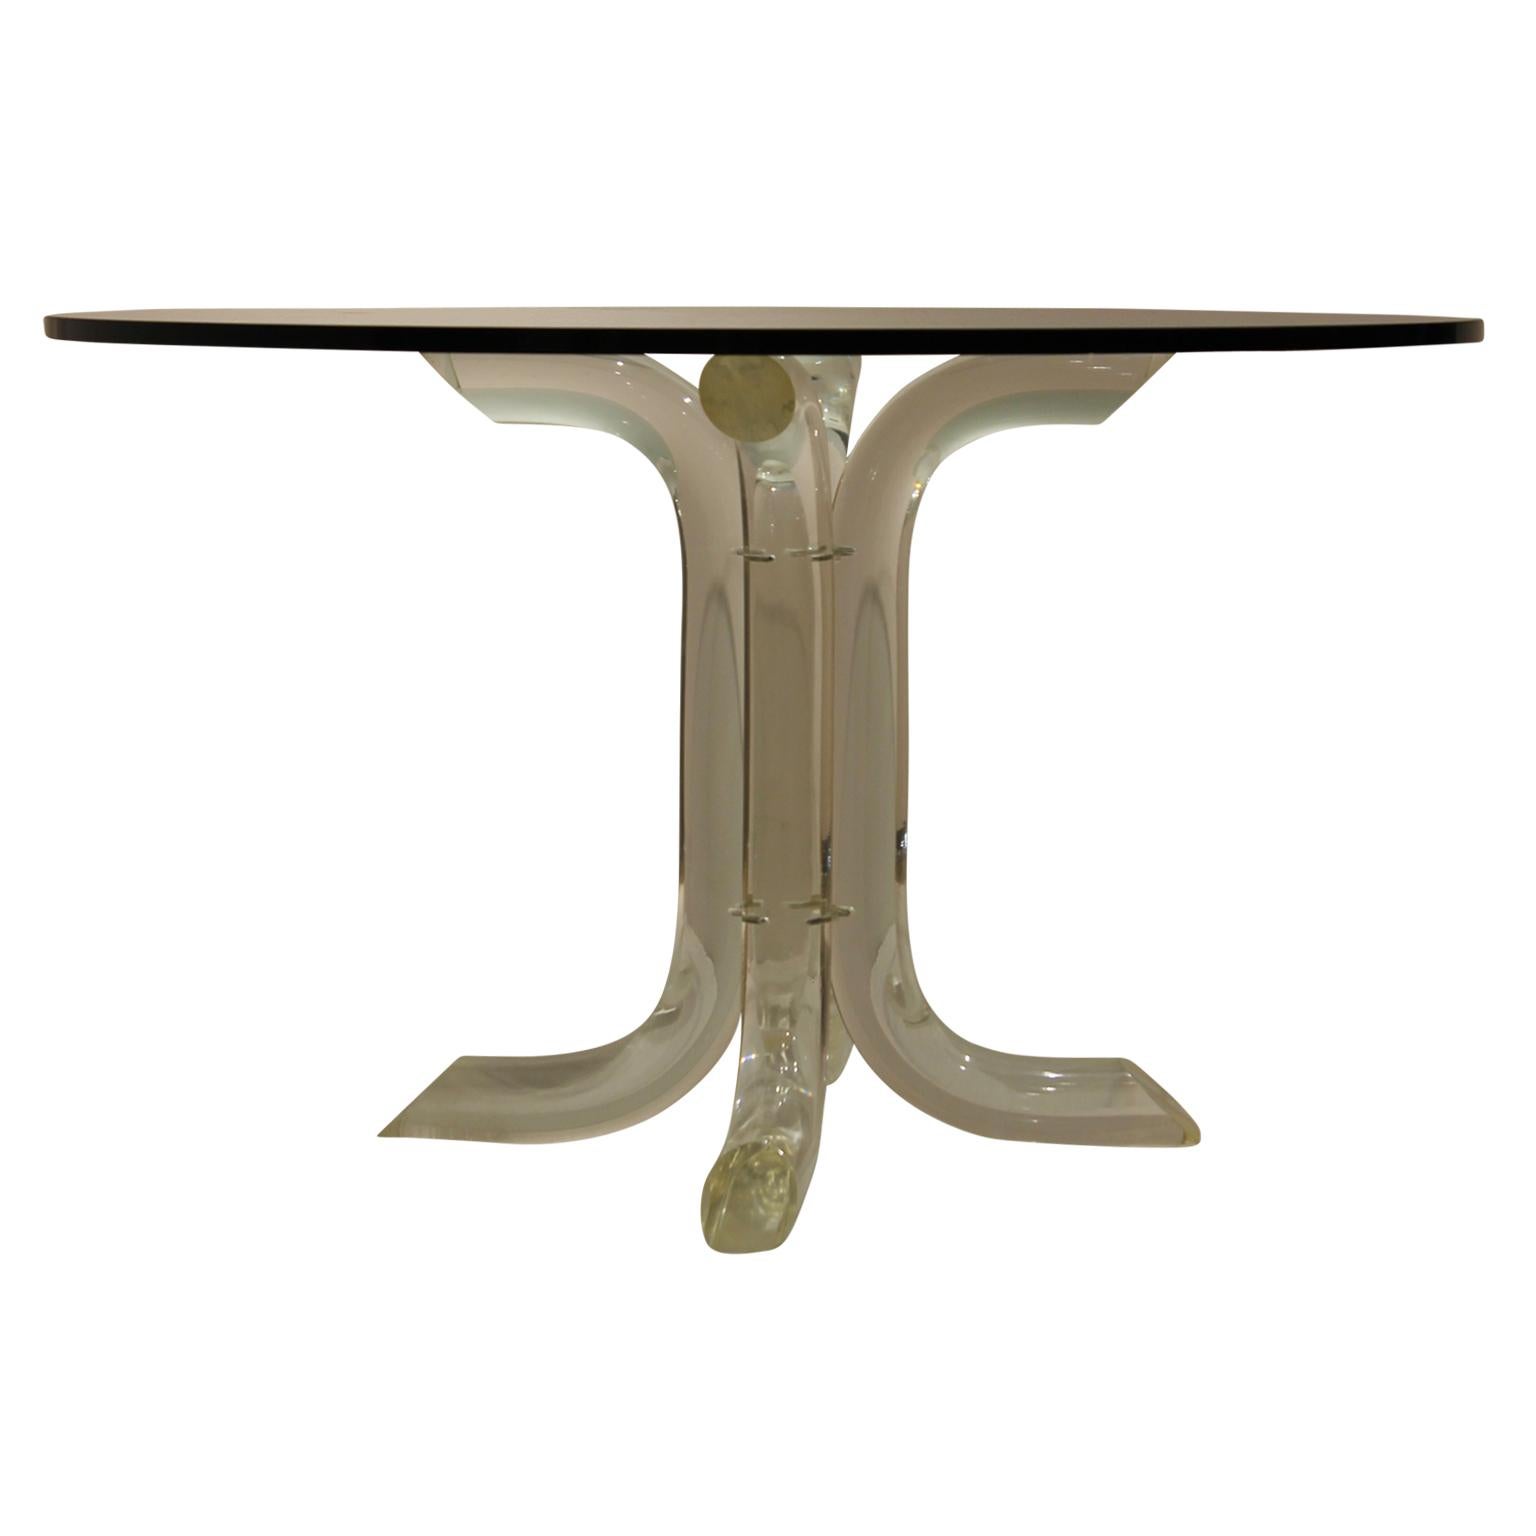 Mid-Century Modern dining table with the original Lucite base from the 1970s and a glass top. The table is in the style of famous Lucite furniture designer Charles Hollis Jones. Towards the bottom of the leg is come crazing but it is not significant